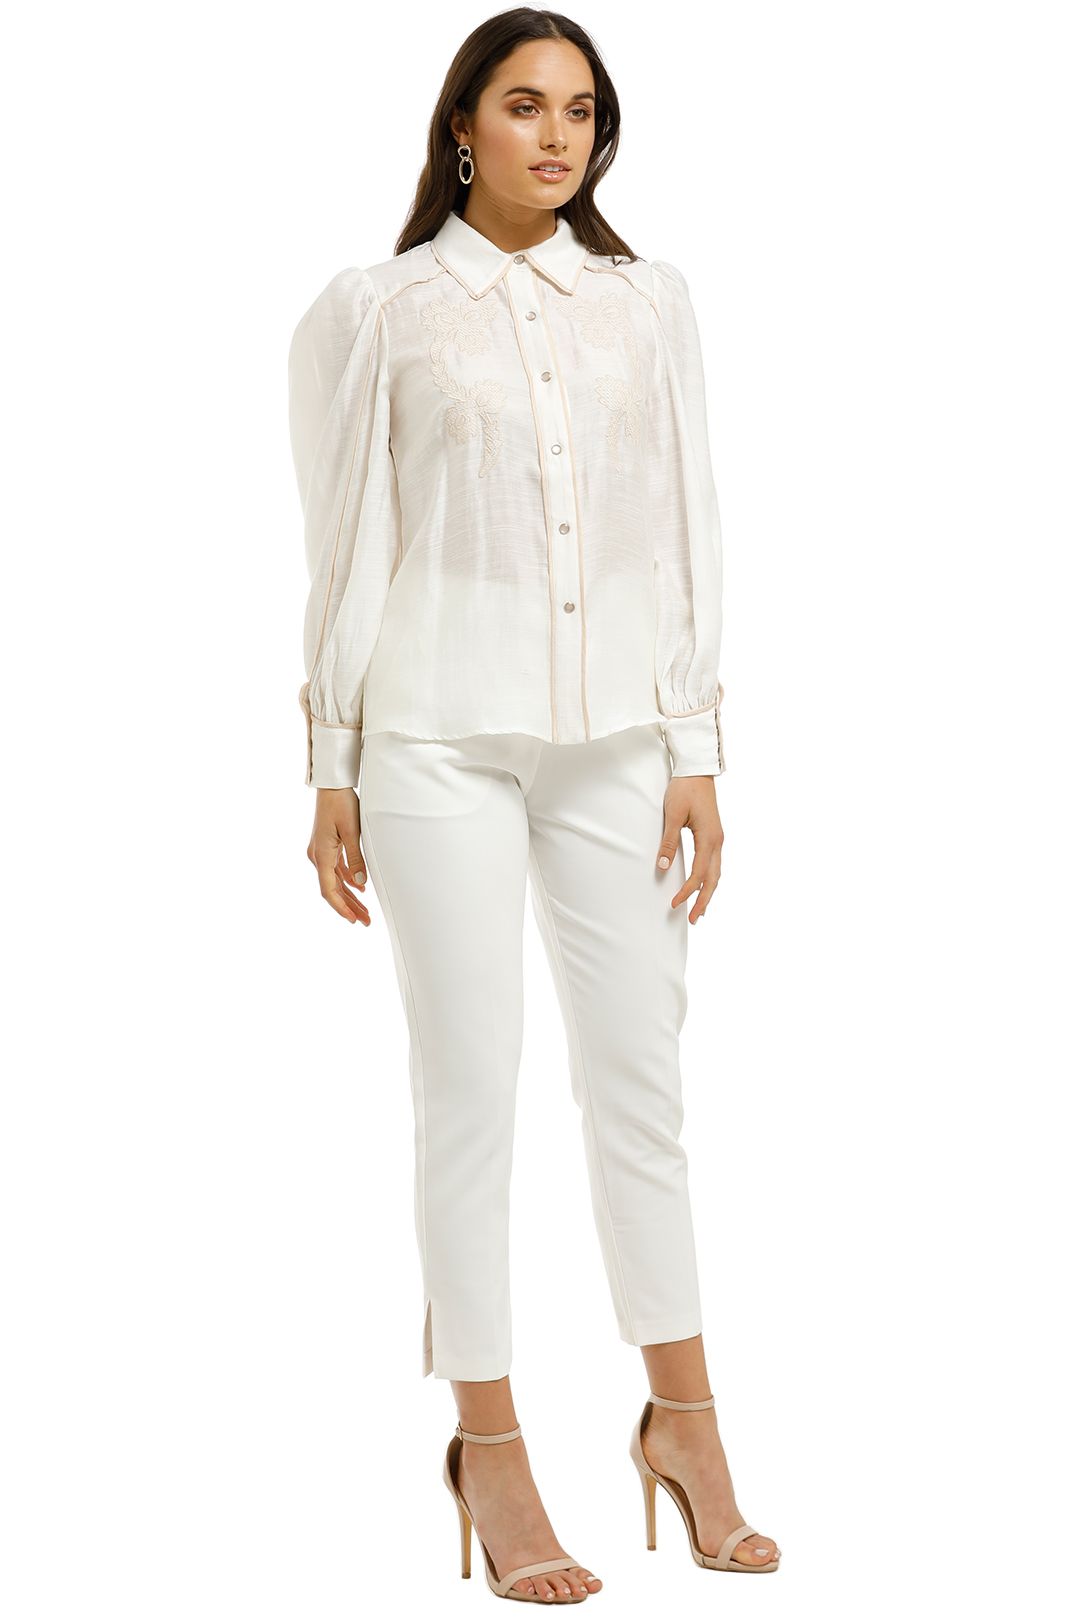 CMEO-Collective-Nearby-Shirt-Ivory-Side